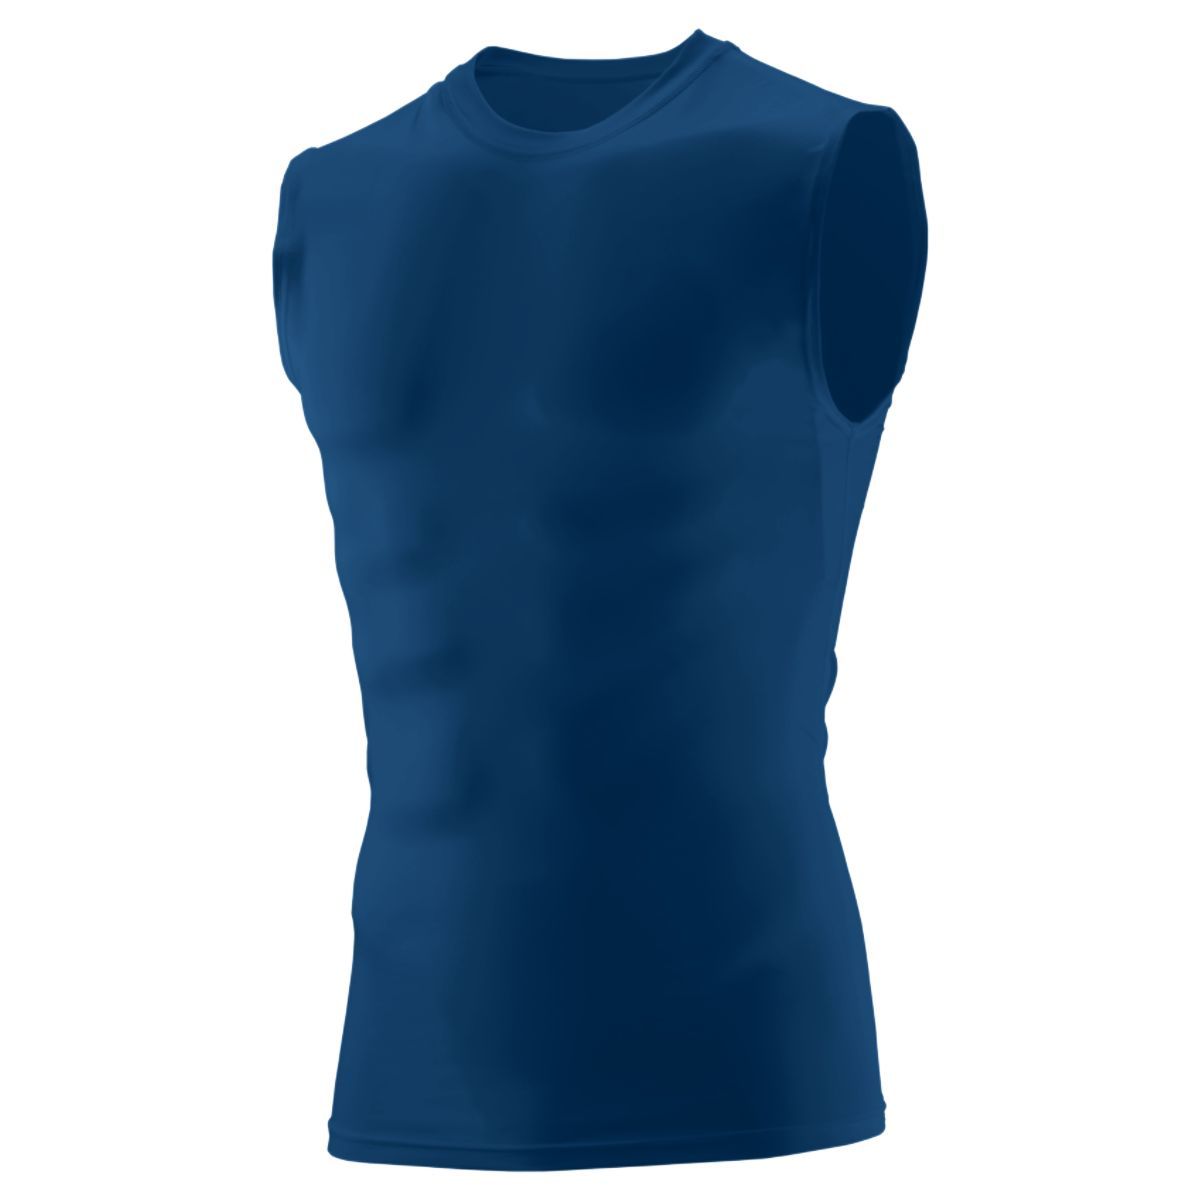 Augusta Sportswear Hyperform Compression Sleeveless Tee in Navy  -Part of the Adult, Adult-Tee-Shirt, T-Shirts, Augusta-Products, Shirts product lines at KanaleyCreations.com